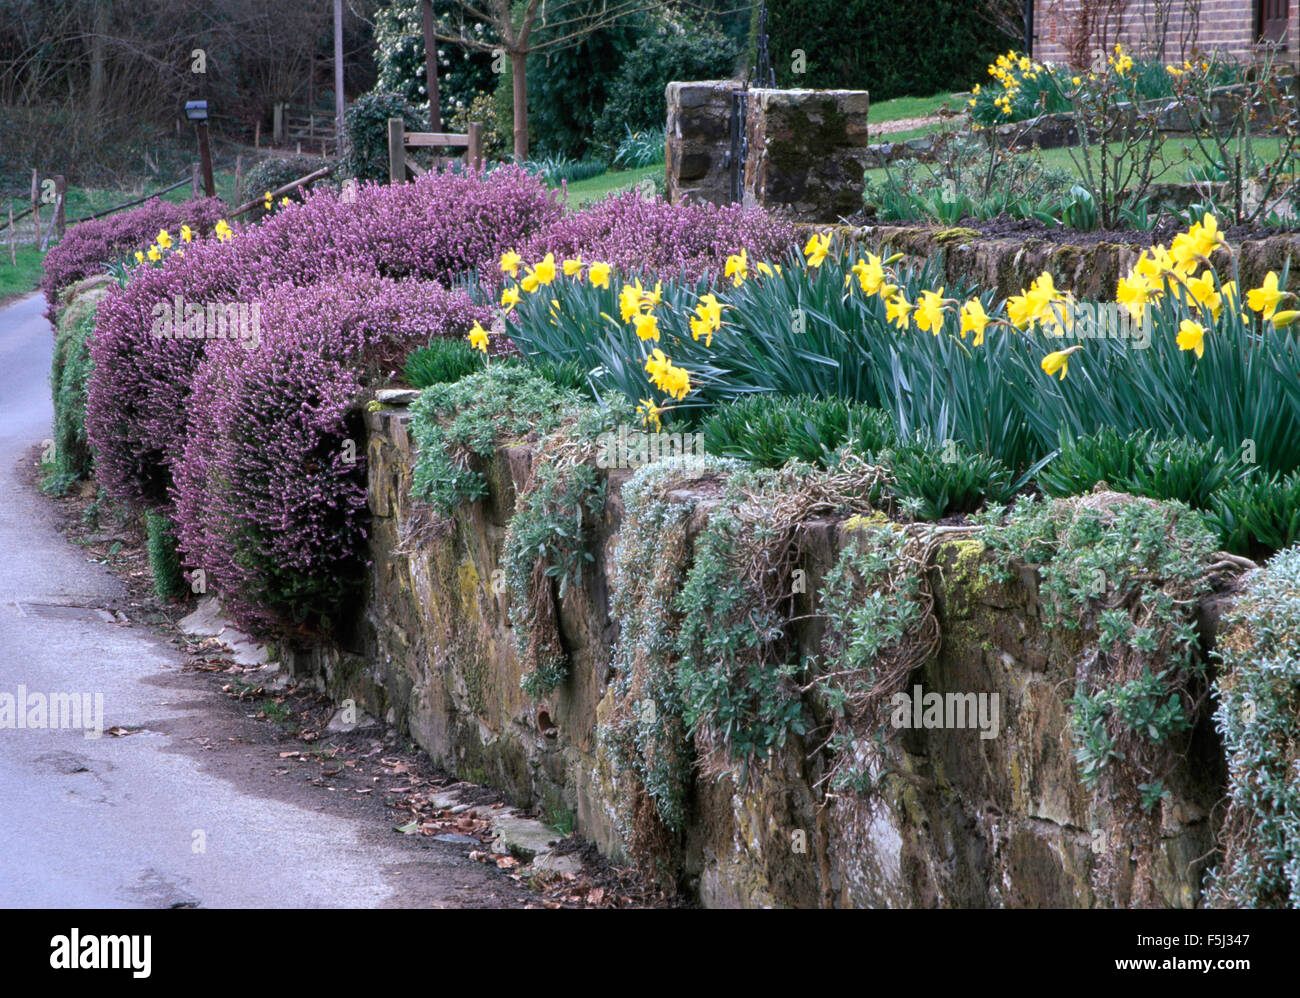 Daffodils and pink aubretia above old stone wall in country garden Stock Photo